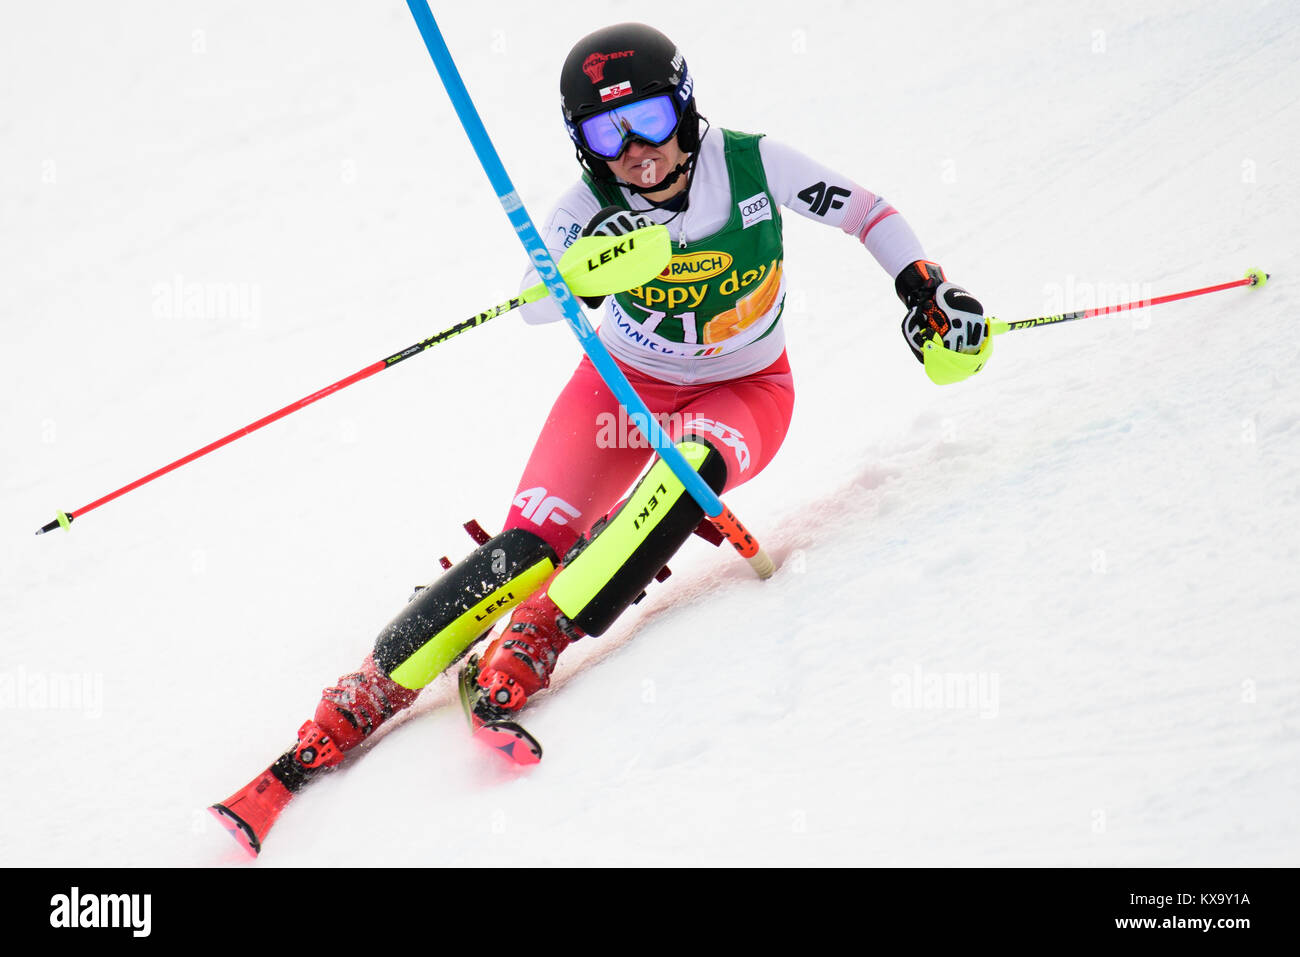 Kranjska Gora, Slovenia. 07th Jan, 2018. Maryna Gasienica-Daniel of Poland competes on course during the Slalom race at the 54th Golden Fox FIS World Cup in Kranjska Gora, Slovenia on January 7, 2018. Credit: PACIFIC PRESS/Alamy Live News Stock Photo